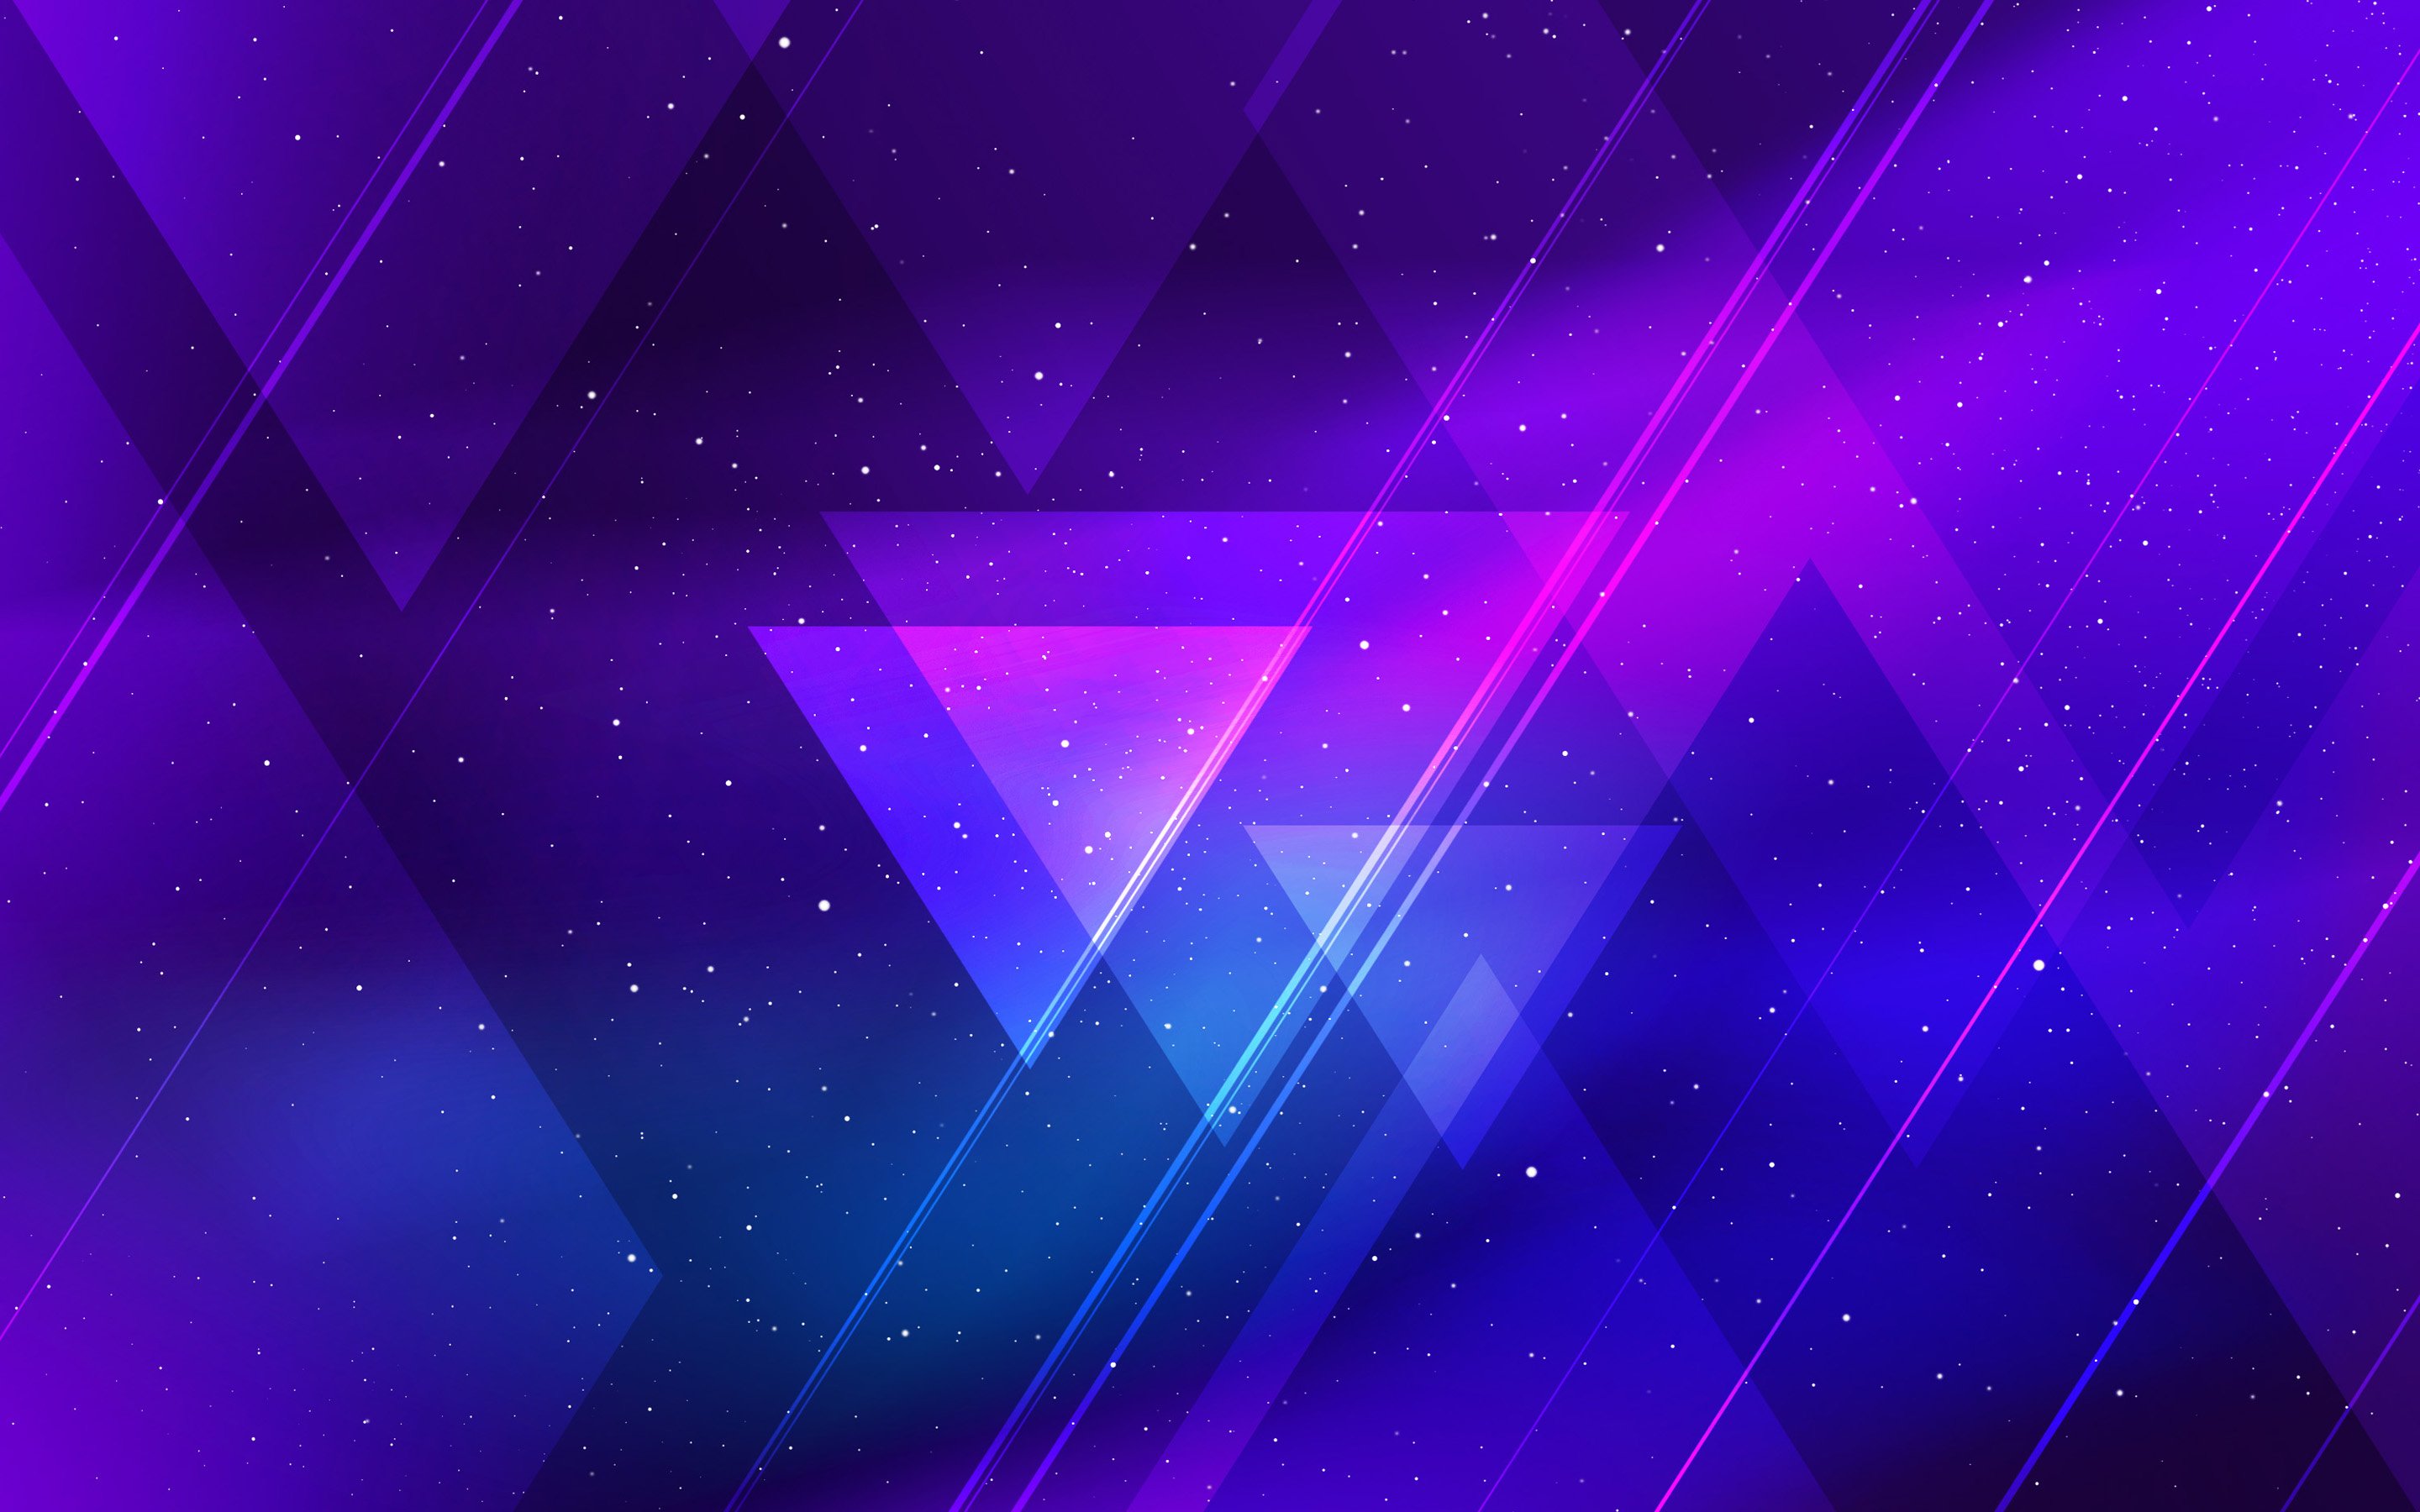 Download wallpapers purple triangles, material design, geometric shapes,  lollipop, lines, creative, purple backgrounds, abstract art for desktop  with resolution 2880x1800. High Quality HD pictures wallpapers